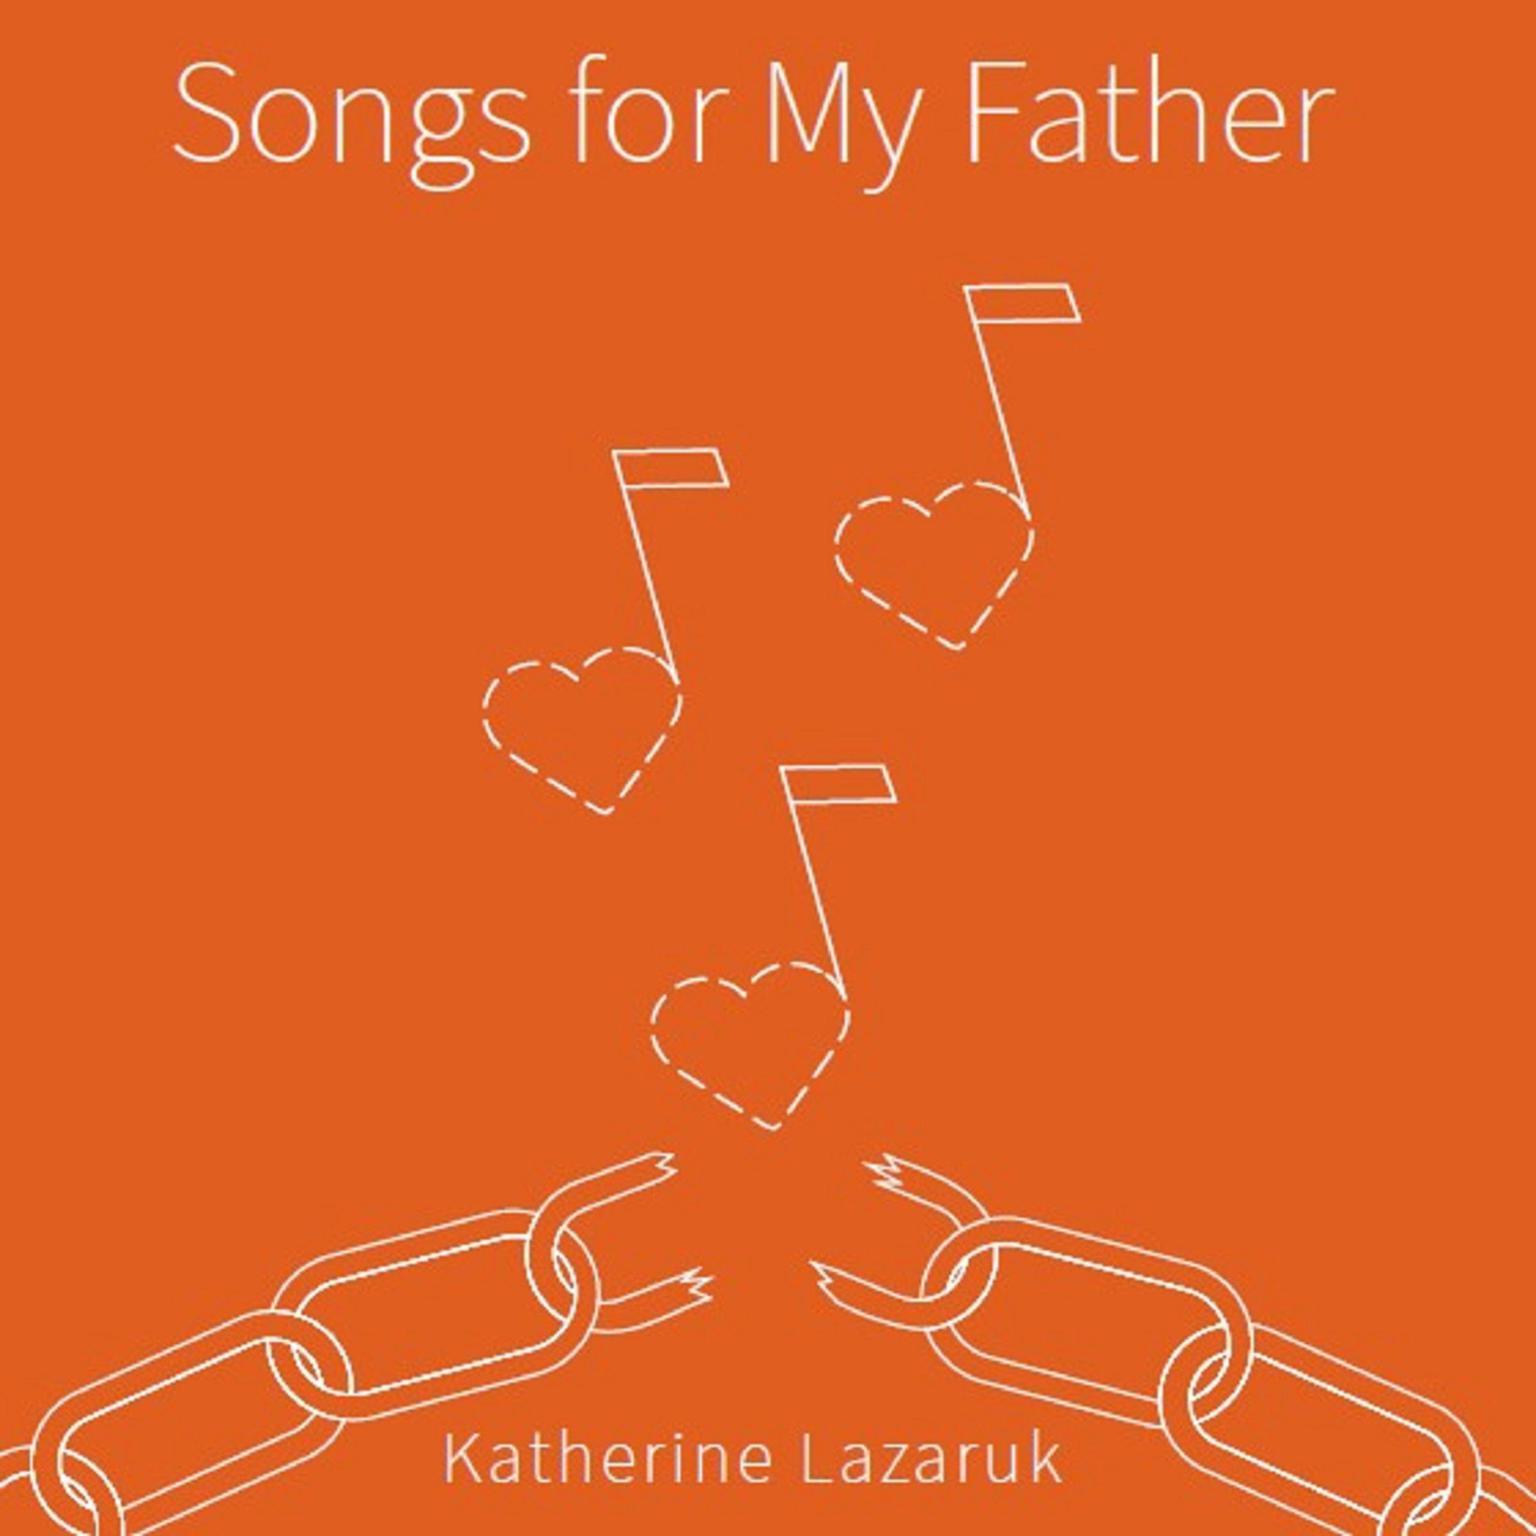 Songs for My Father Audiobook, by Katherine Lazaruk